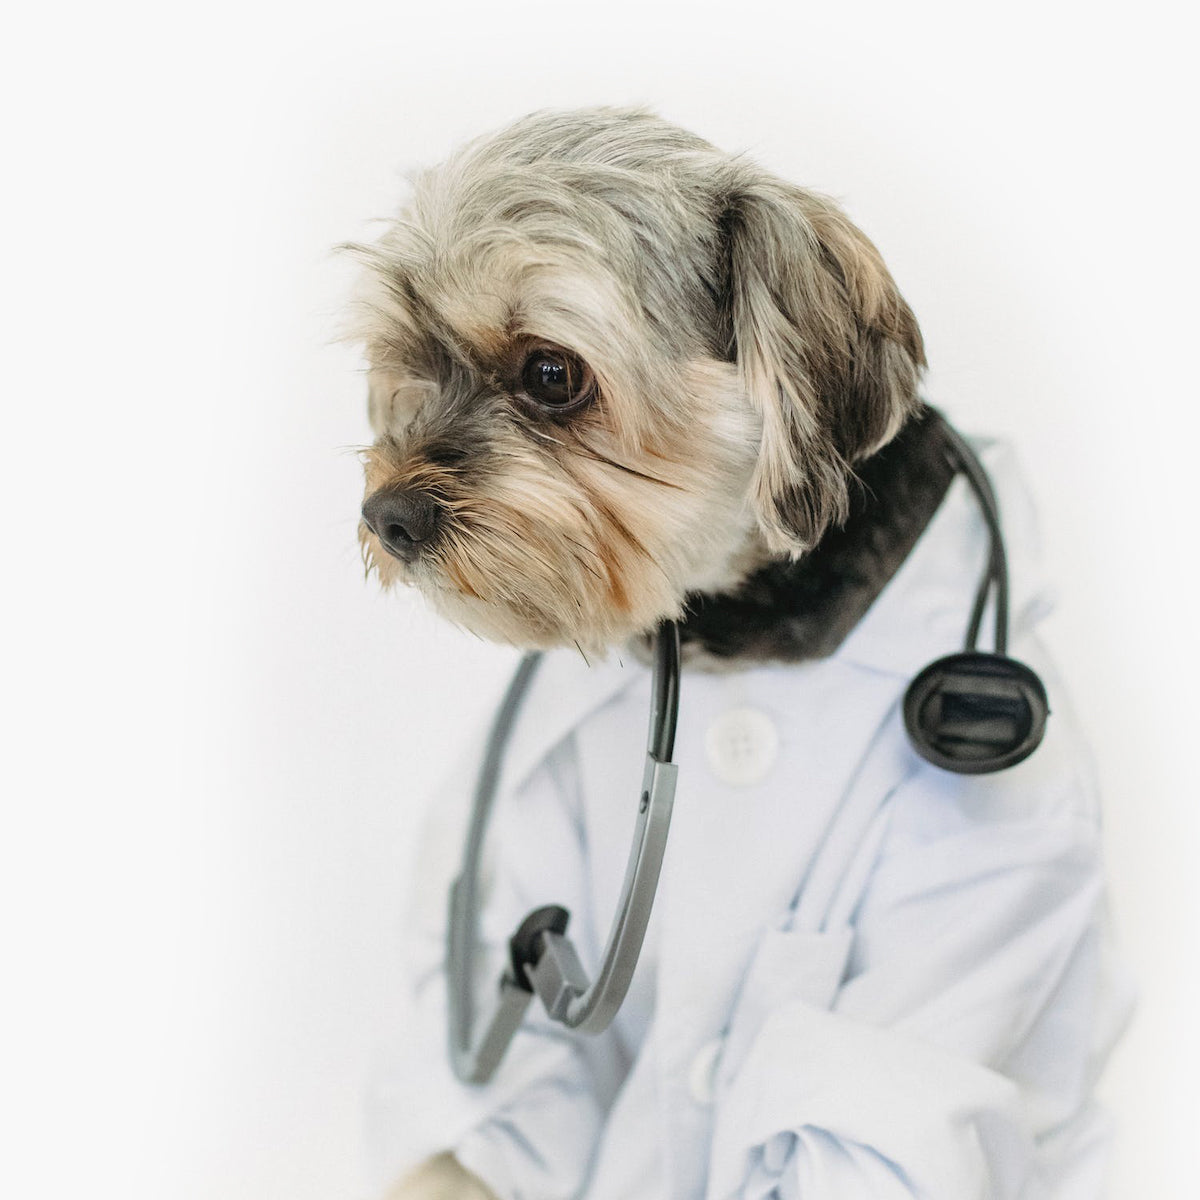 Direct4Pet cute dog dressed as veterinarian with stethoscope, gray and white coat, pet healthcare costume, engaging animal themed content for online pet supply and medication.